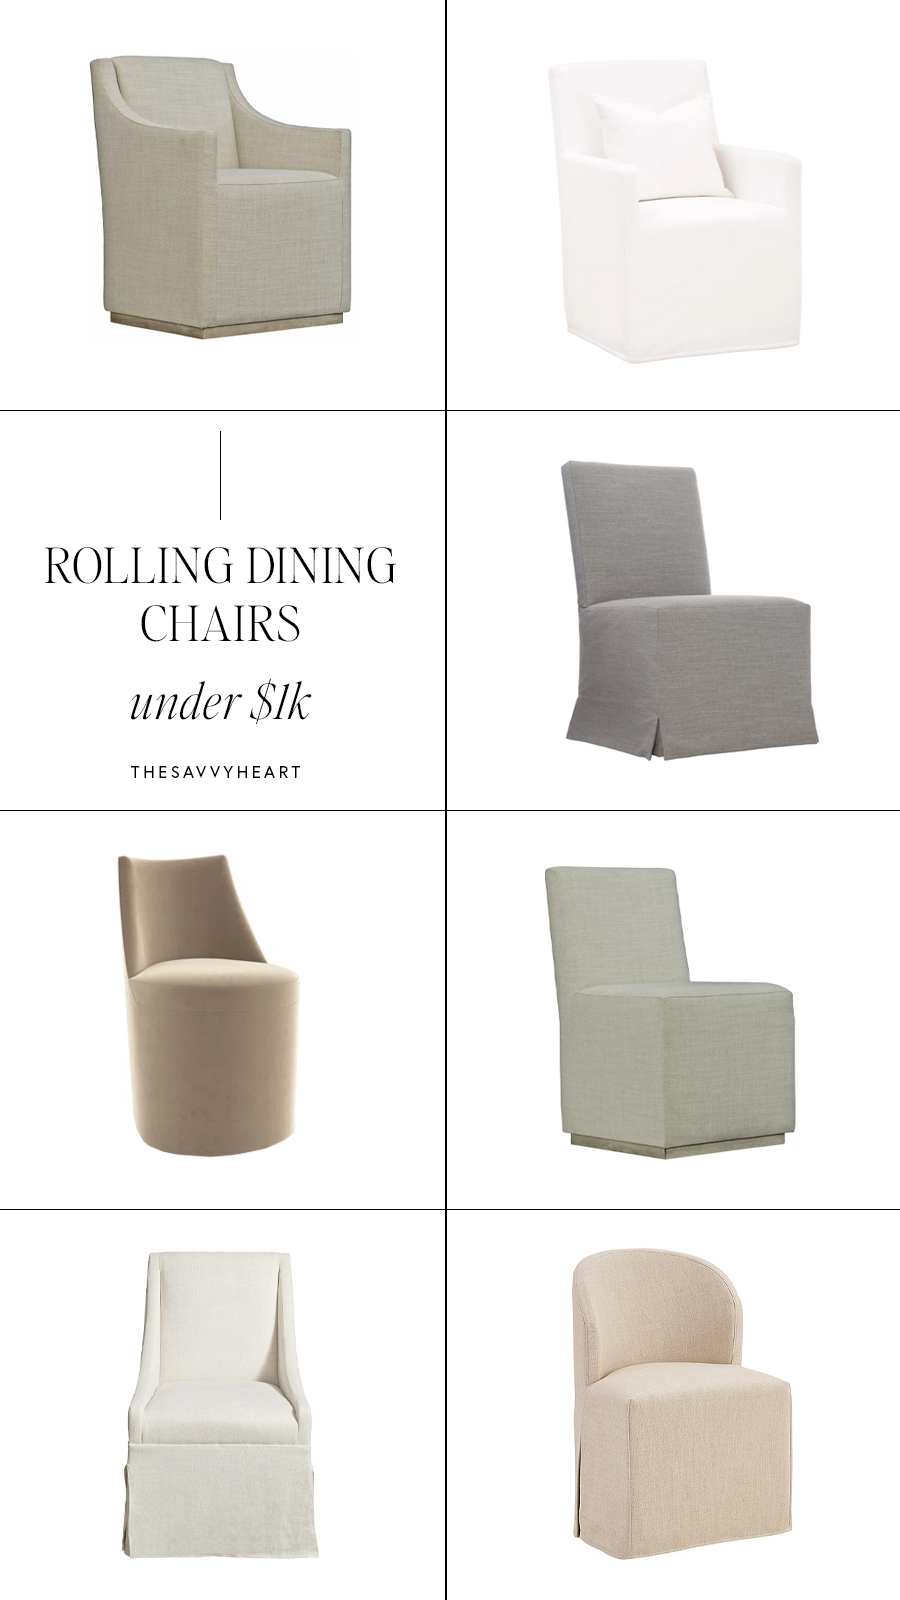 21 Upholstered Dining Room Chairs with Rolling Casters & Wheels